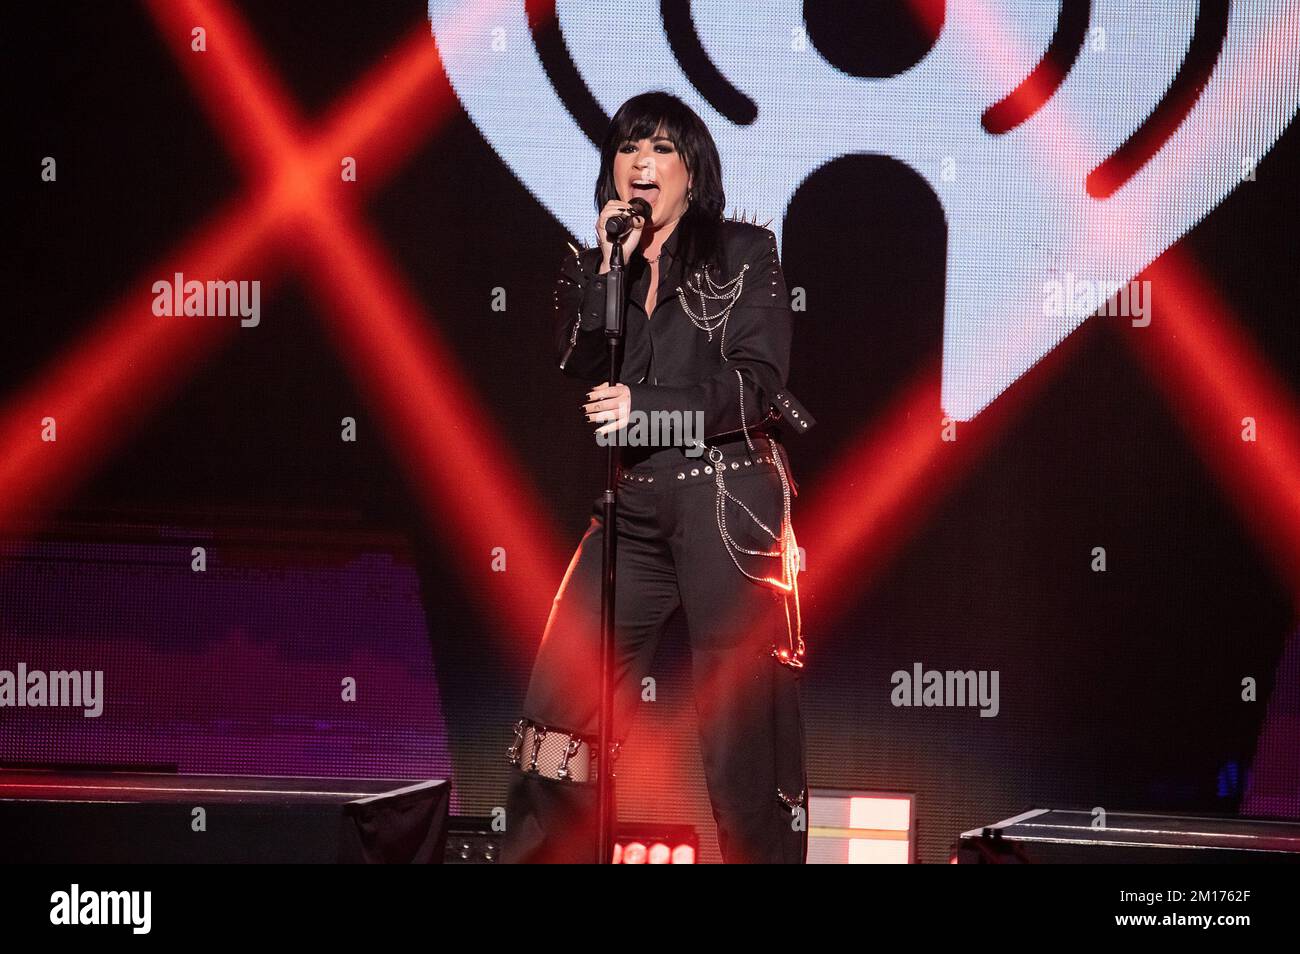 New York, USA. 09th Dec, 2022. Demi Lovato performs onstage at the iHeartRadio Z100's Jingle Ball 2022 Presented by Capital One at Madison Square Garden on December 9, 2022 in New York, New York. Photo: Jeremy Smith/imageSPACE Credit: Imagespace/Alamy Live News Stock Photo